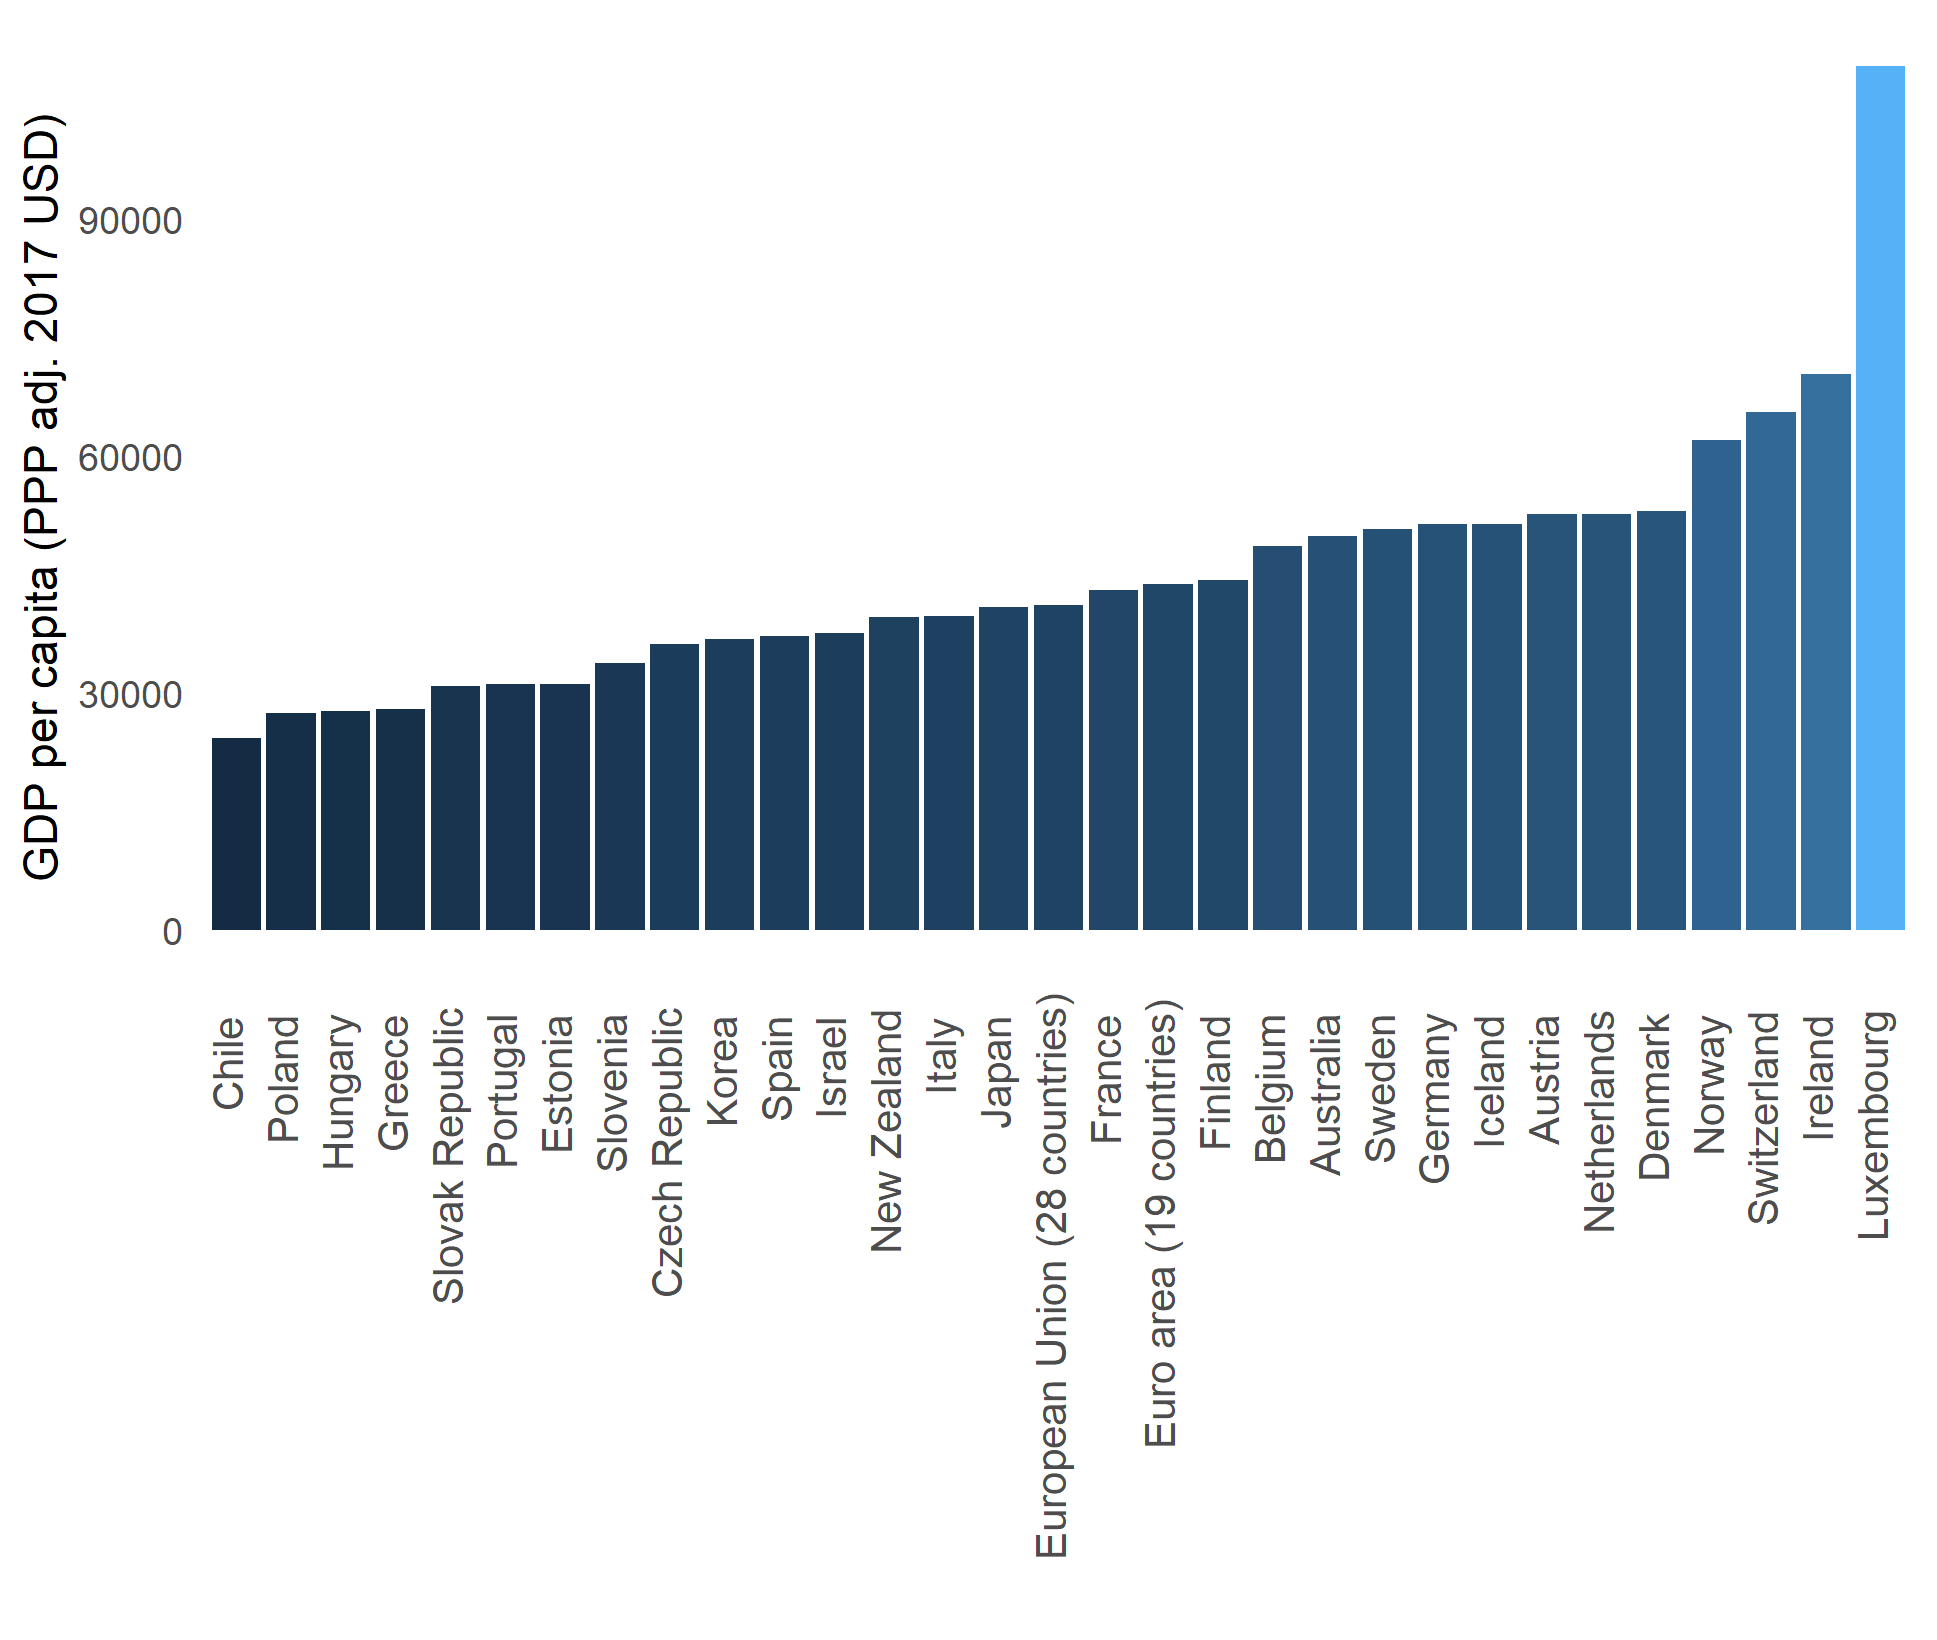 GDP per capita for selected countries in 2015, measured in 2017 USD - PPP adjusted. Source: OECD. 